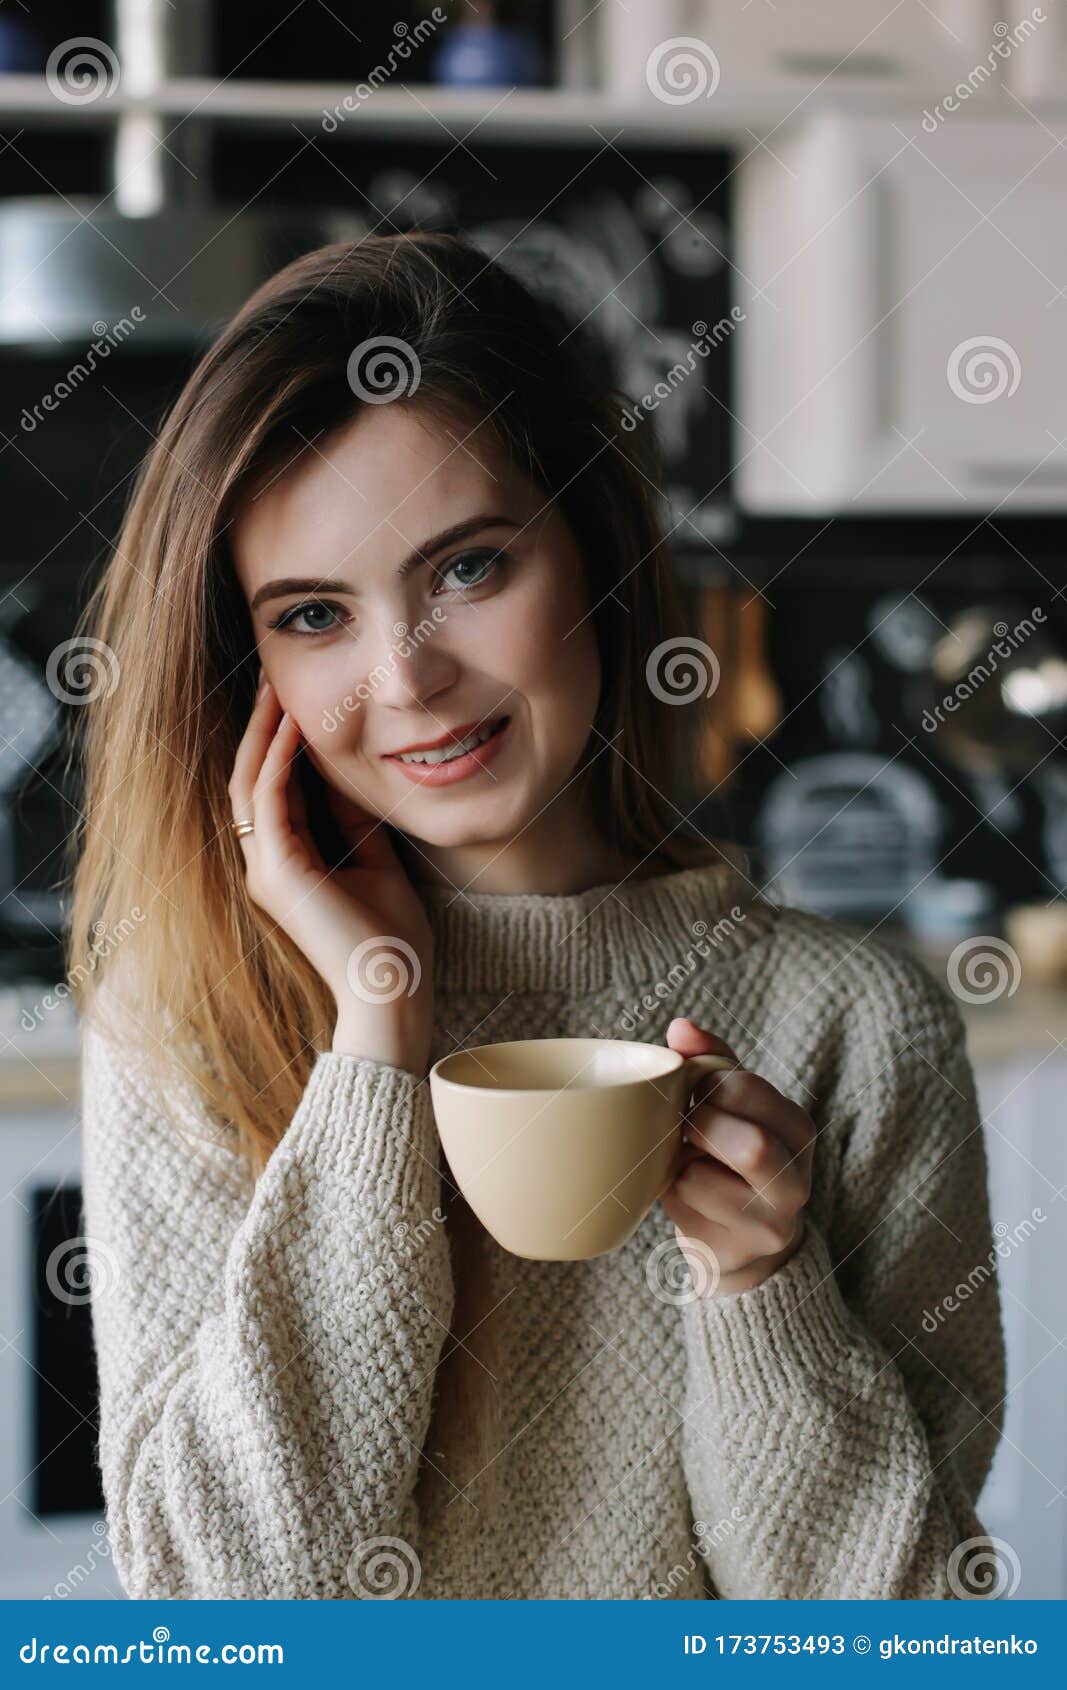 A Girl Drinking Coffee in the Kitchen at Home. Young Woman Holding Cup ...